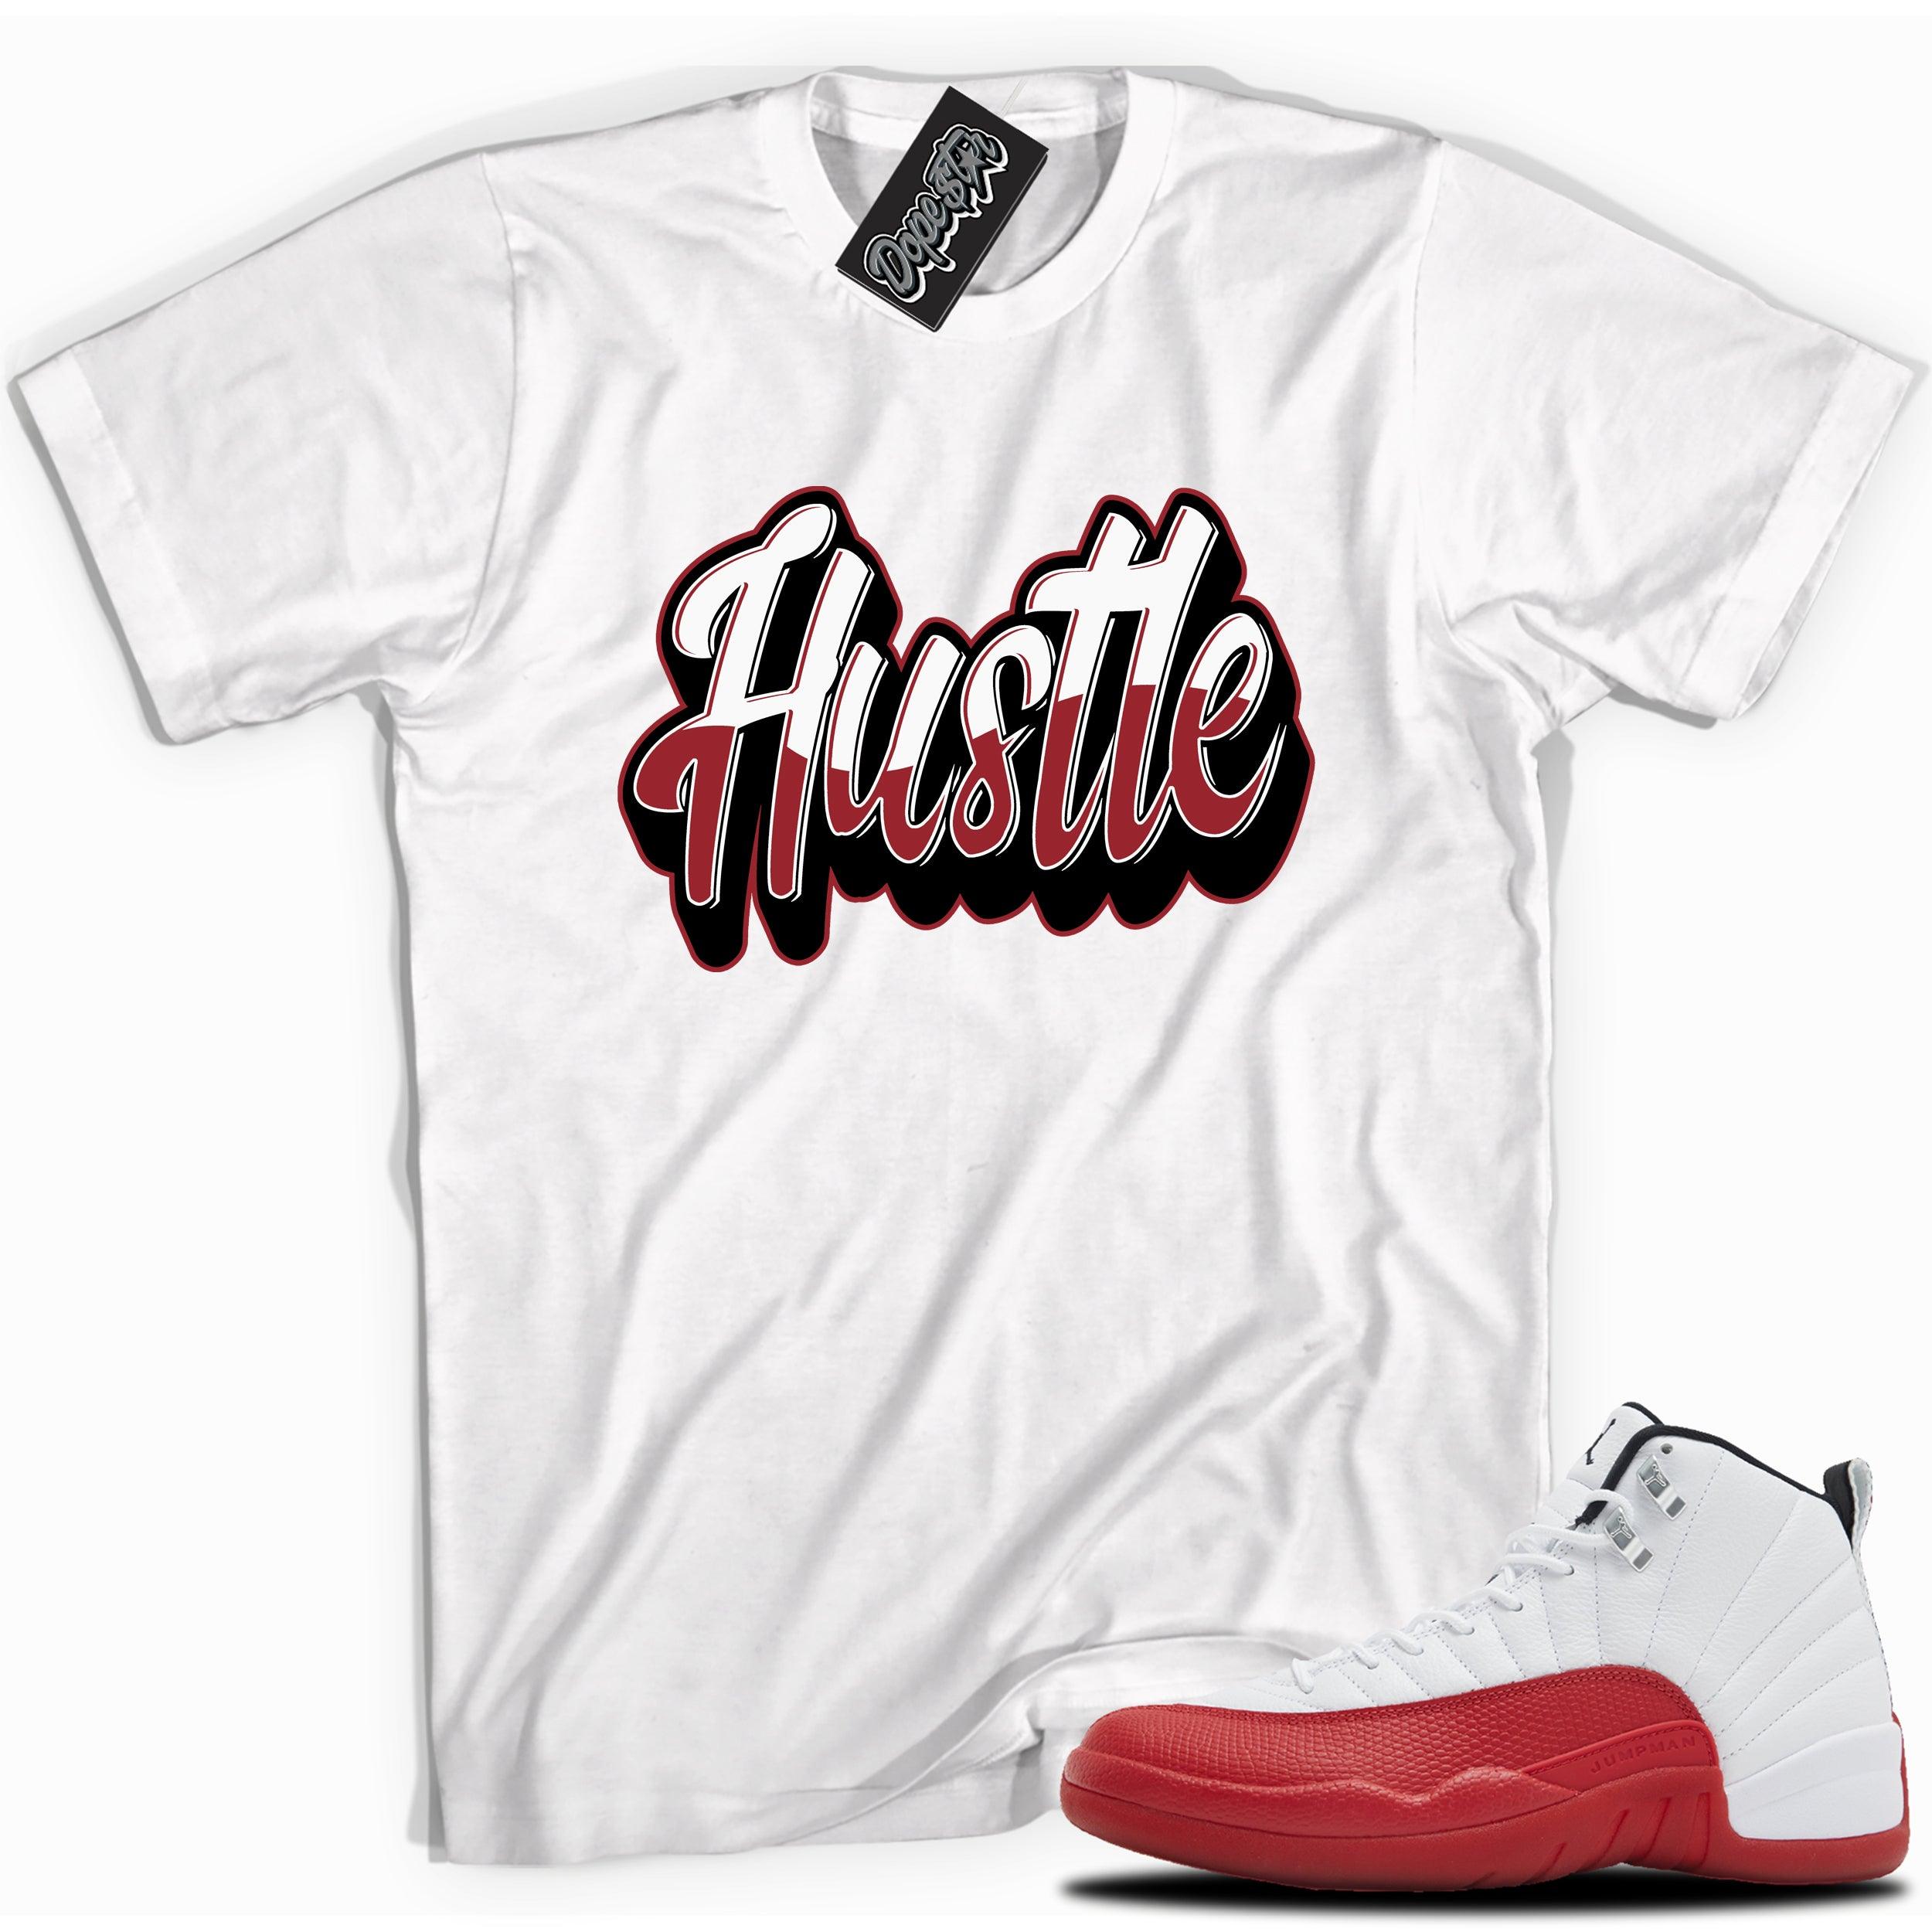 Cool White graphic tee with “ HUSTLE 2 ” print, that perfectly matches Air Jordan 12 Retro Cherry Red 2023 red and white sneakers 